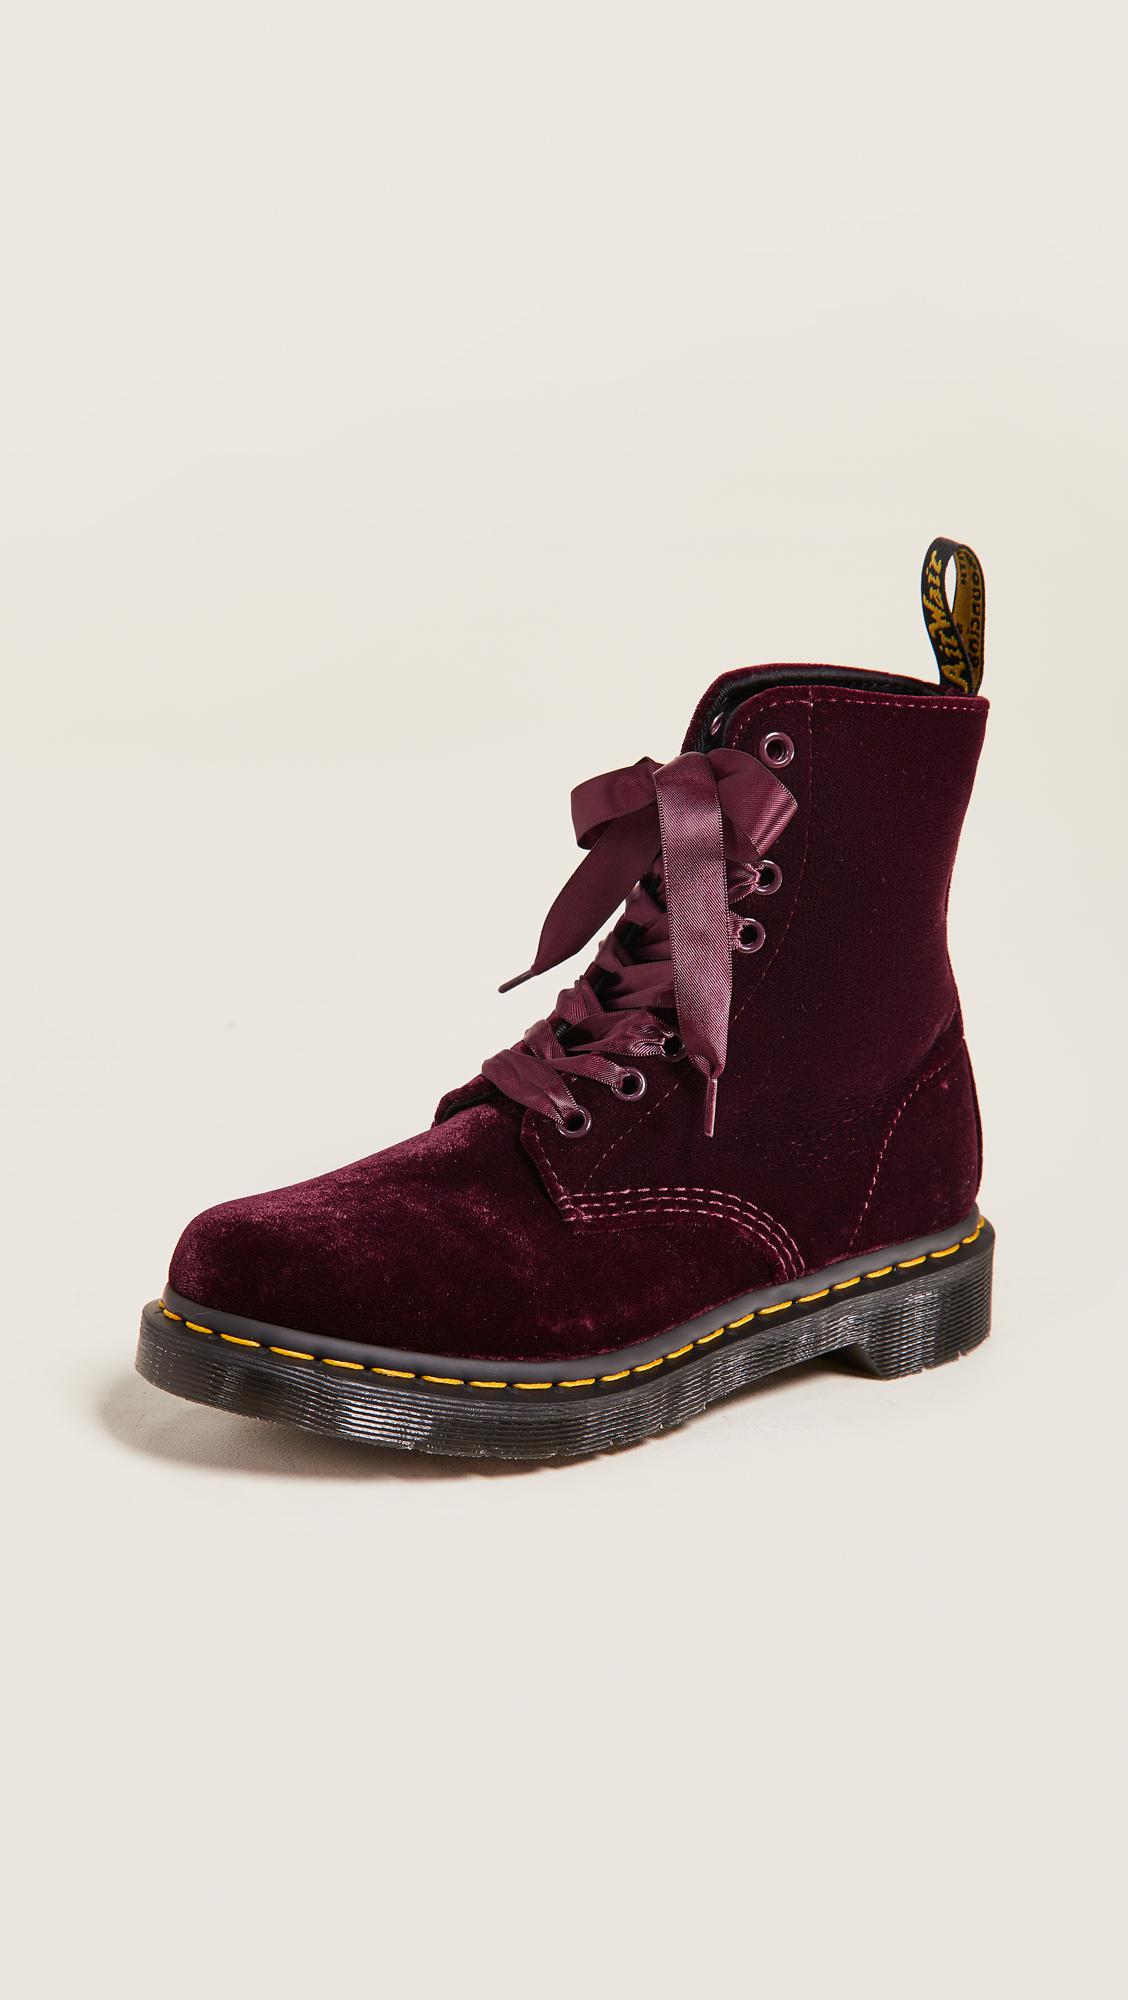 Dr. Martens 1460 Pascal Velvet 8 Eye Boots in Cherry Red (Red) | Lyst